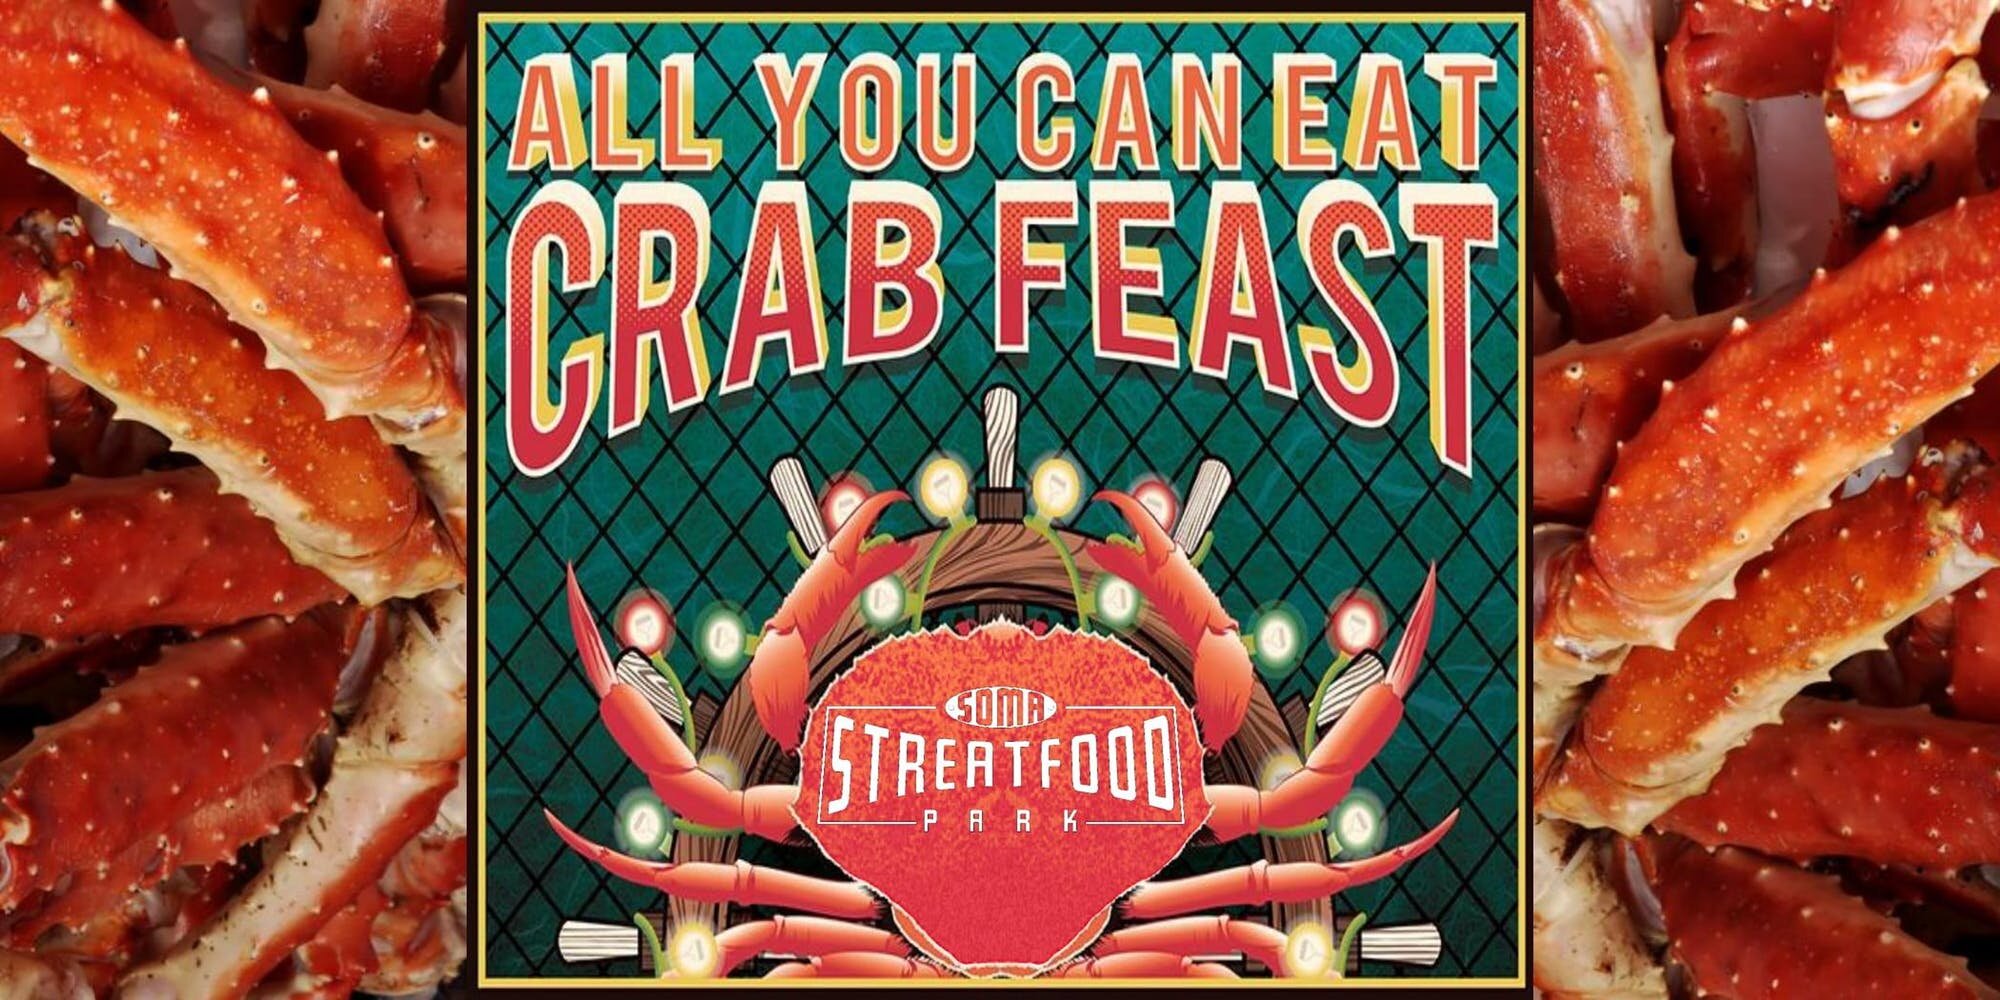 7th Annual All-You-Can-Eat Crab Feast! — SoMa StrEat Food Park